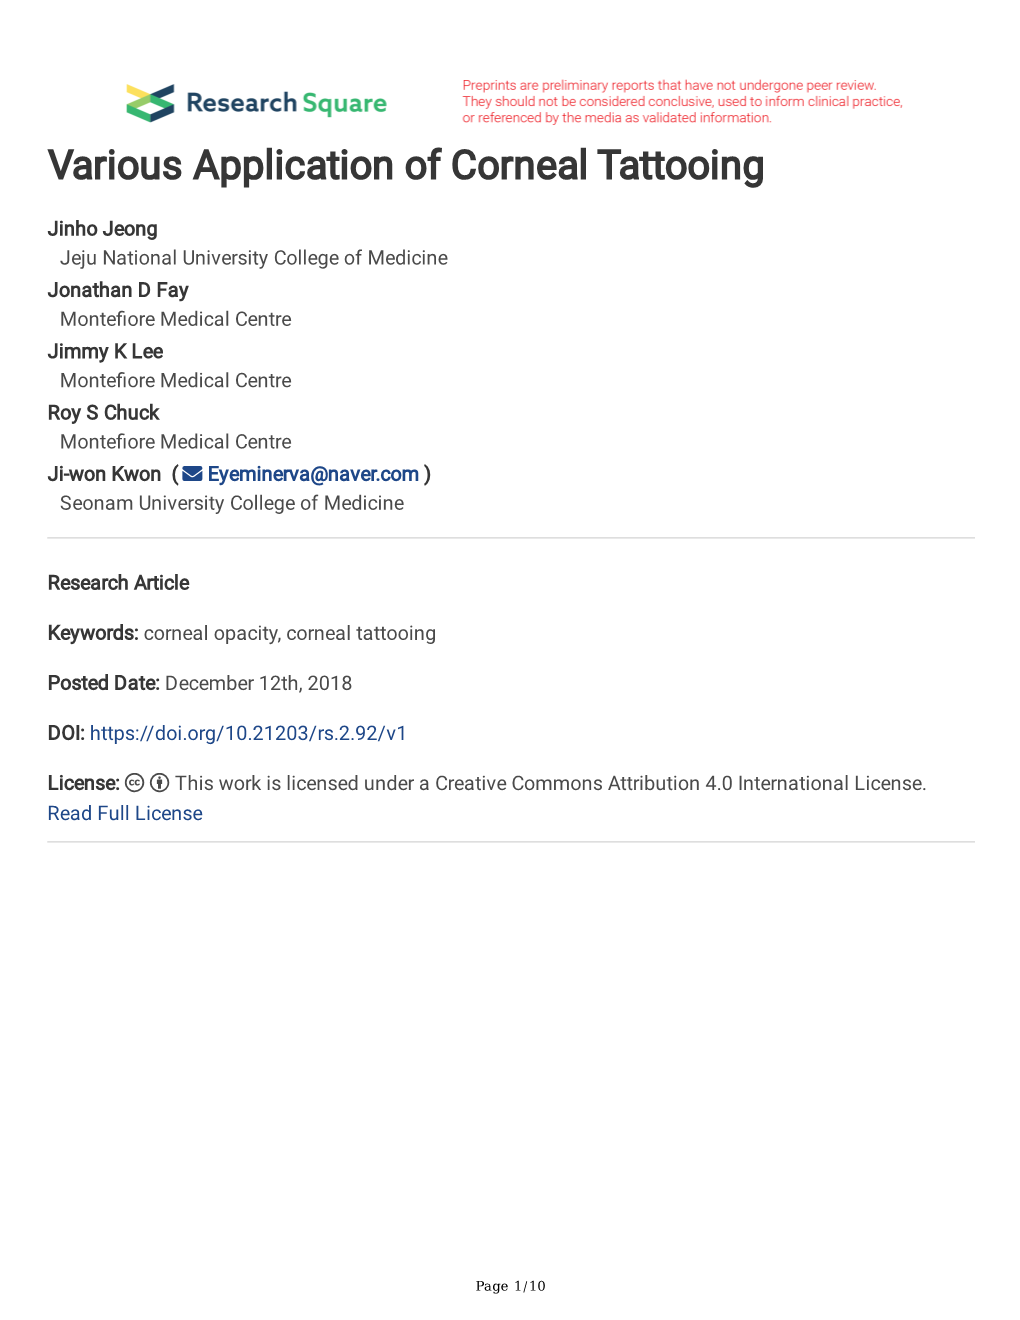 Various Application of Corneal Tattooing